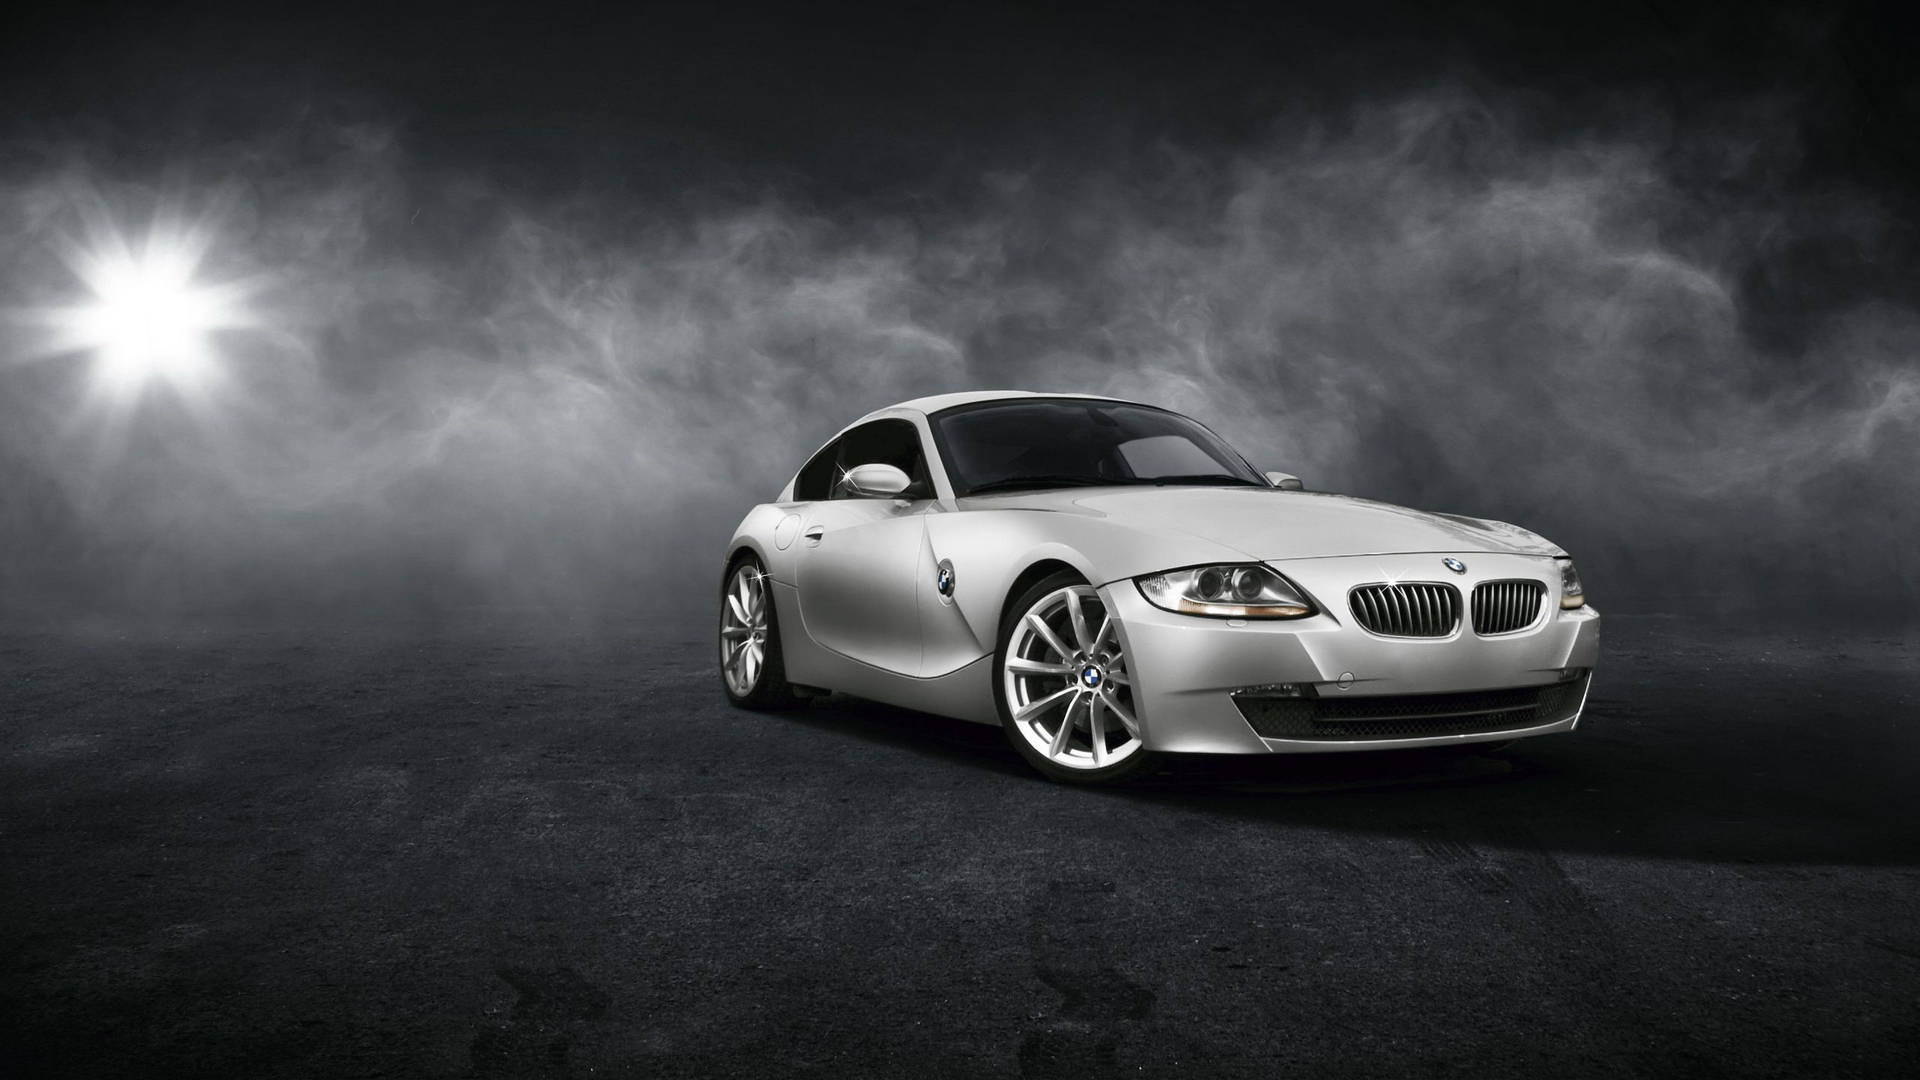 Take the Road in Style with this White BMW Z4 Coupe Wallpaper